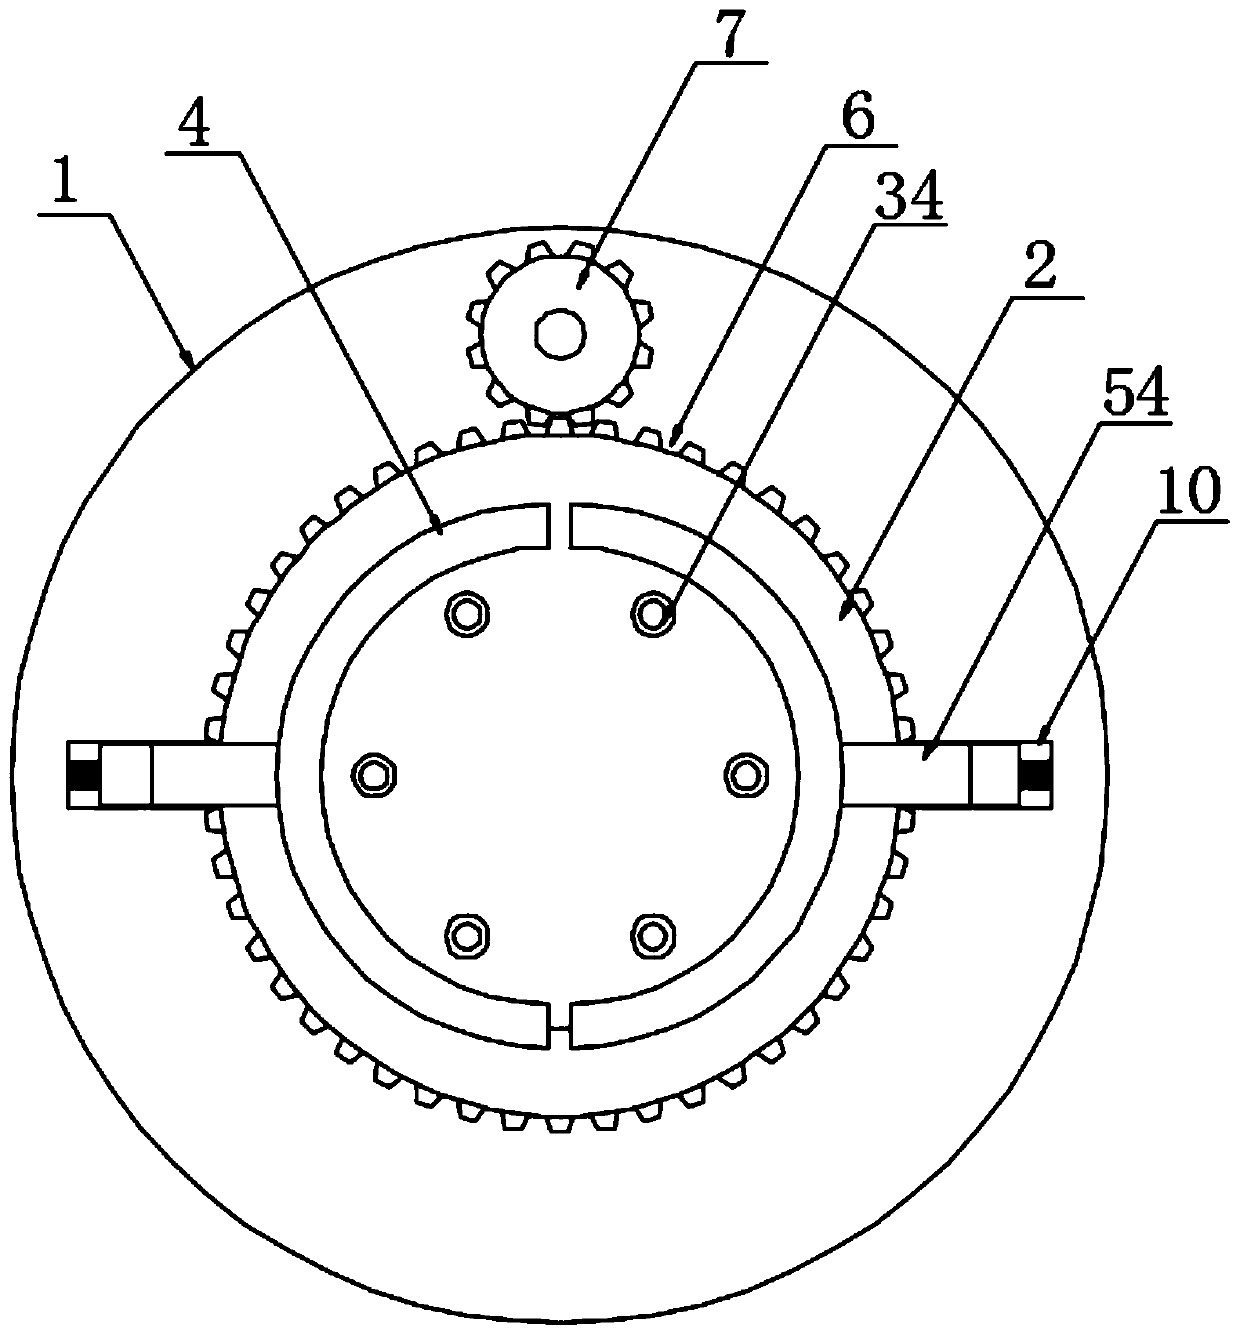 Spherical surface grinding device for ball valve cores